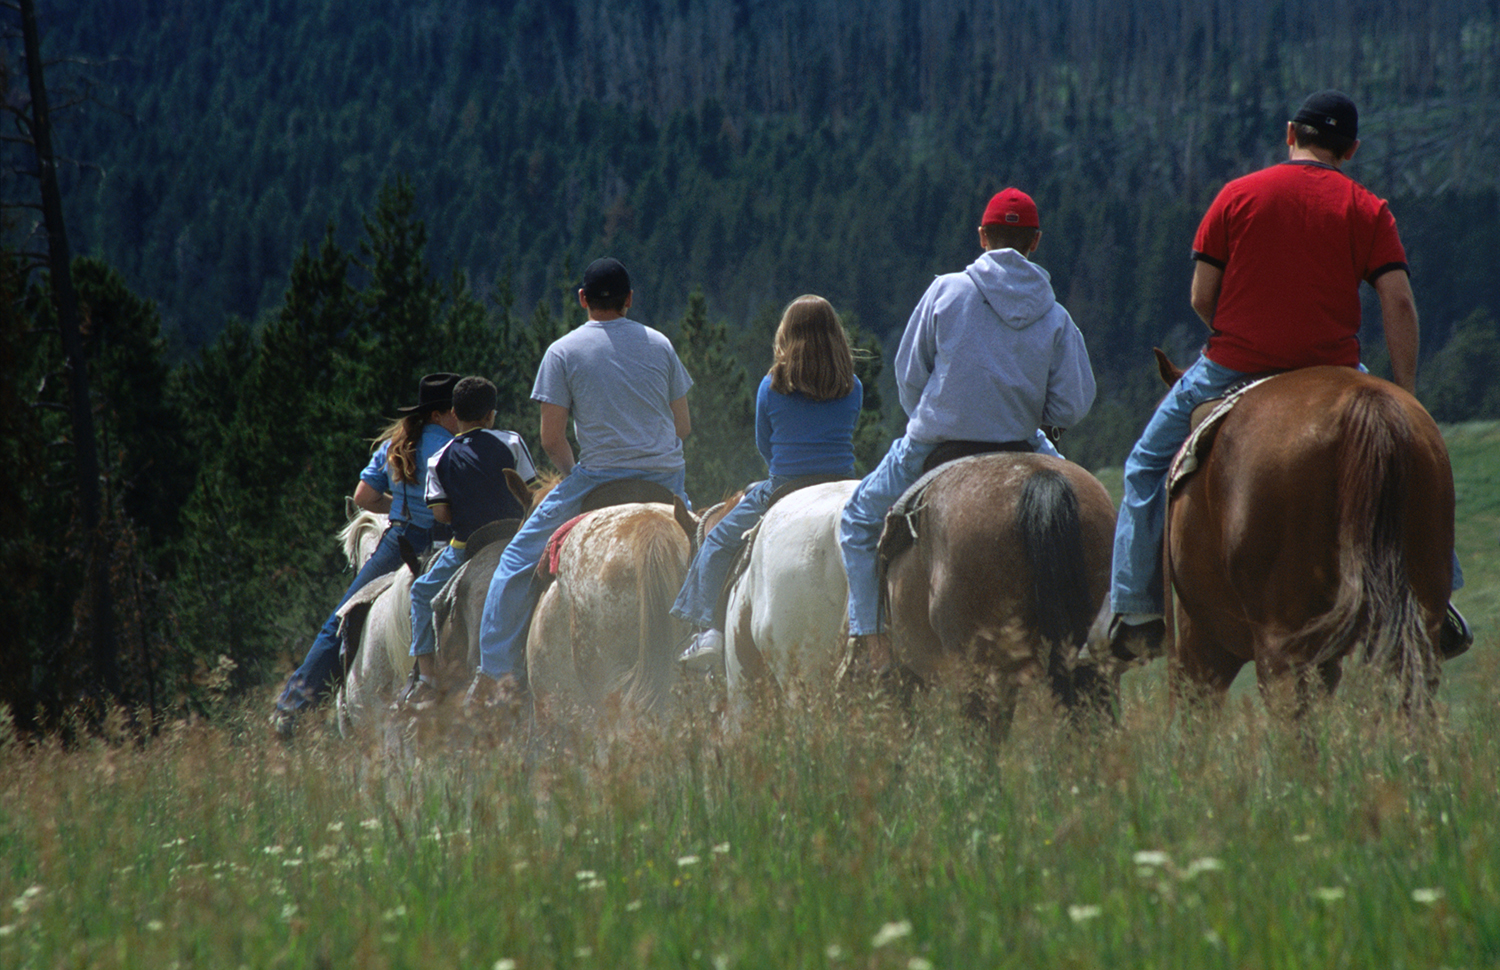 Horseback riding is an adventurous way to hit the trails in Yellowstone National Park © Carol Polich / Getty Images